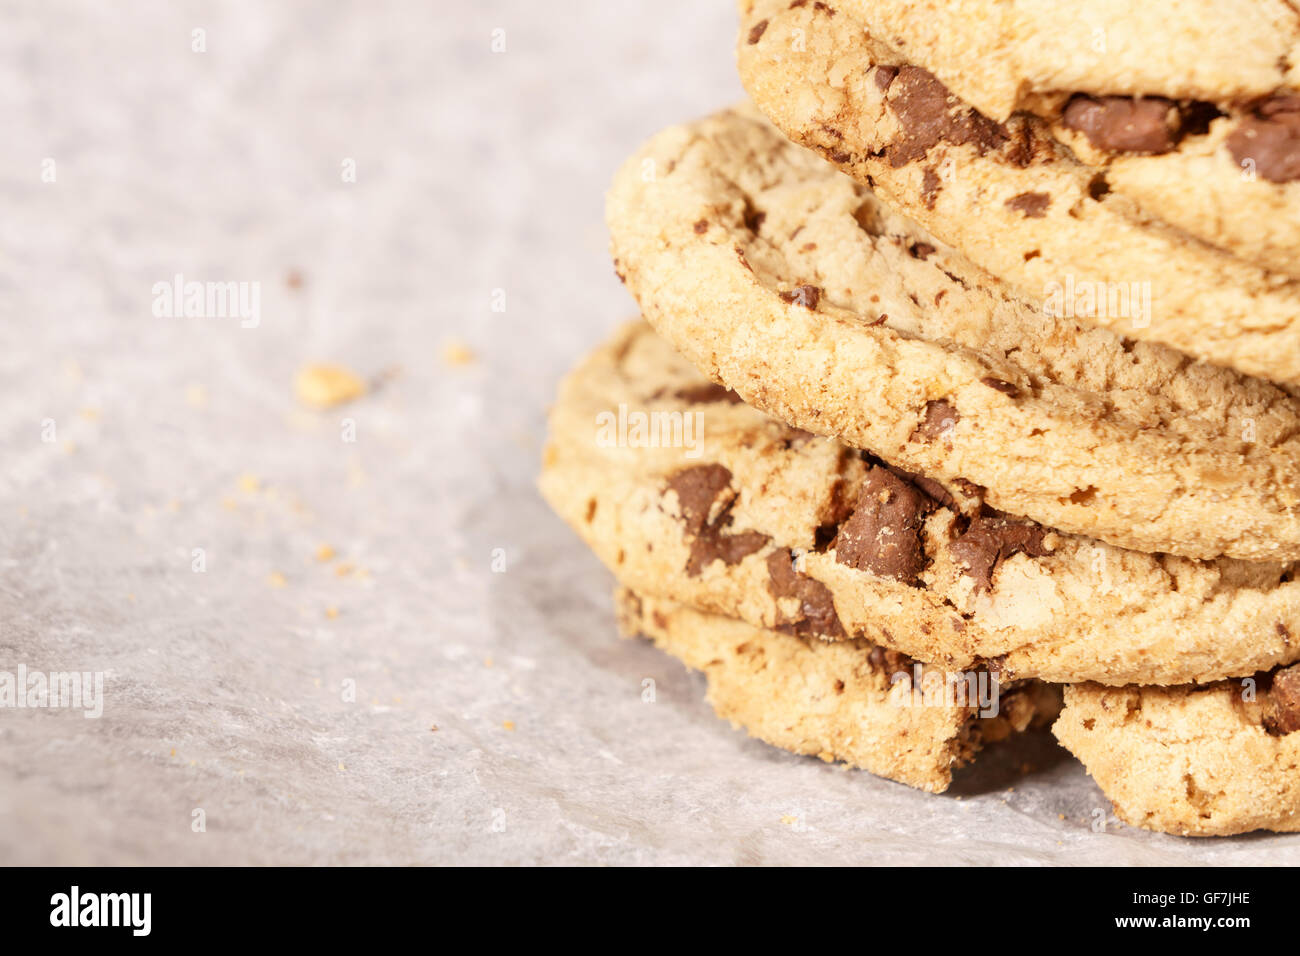 Stacked round soft bake chocolate chip cookie close up Stock Photo